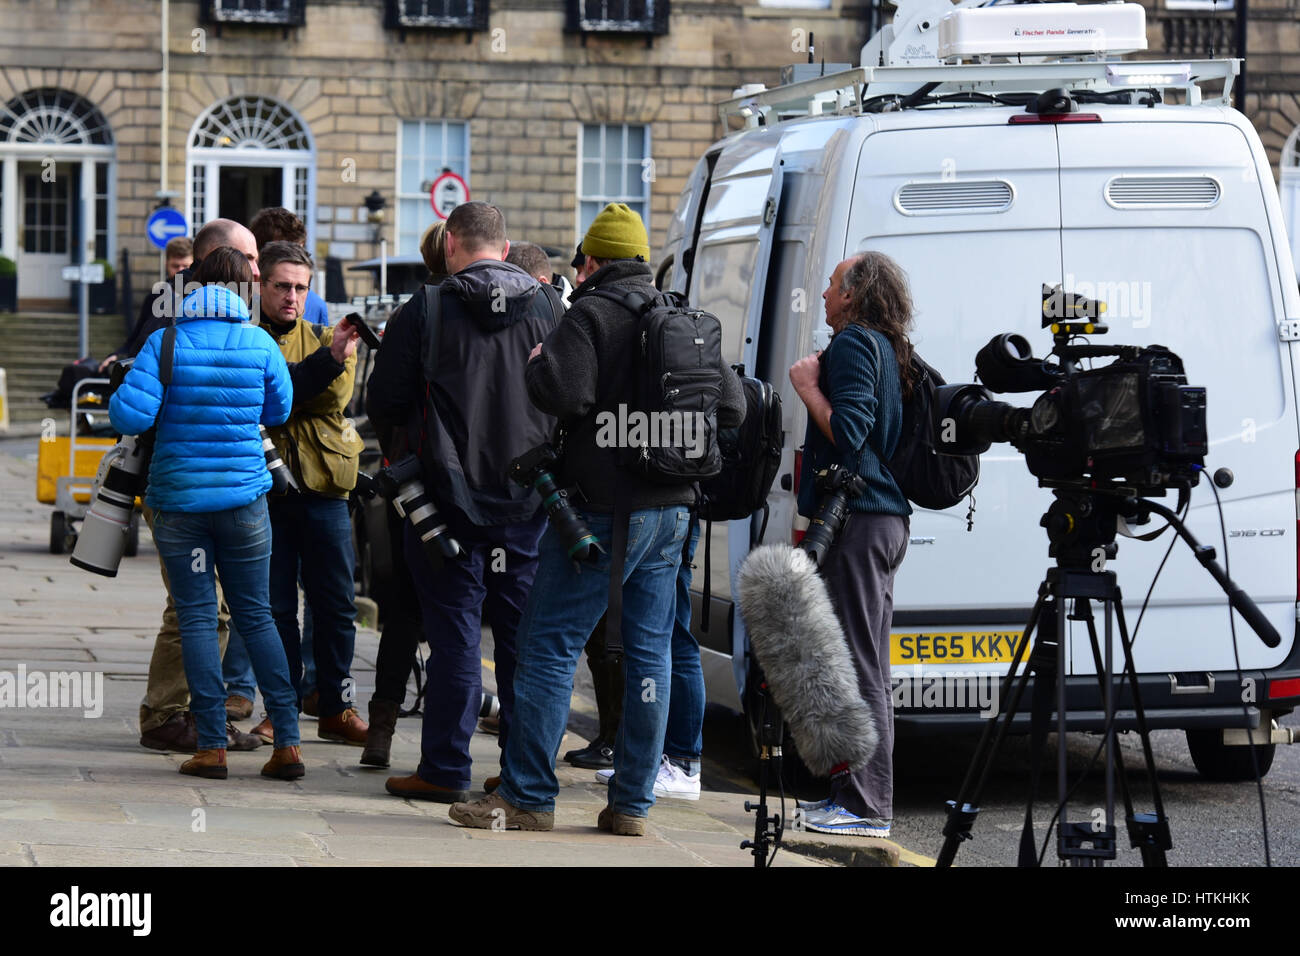 Edinburgh, Scotland, UK. 13th Mar, 2017. Photographers and camera crews wait outside Bute House, the official residence of Scotland's First Minister Nicola Sturgeon, as inside she announces that she intends to seek Scottish Parliament and UK Government approval to call a second referendum on Scottish independence, Credit: Ken Jack/Alamy Live News Stock Photo